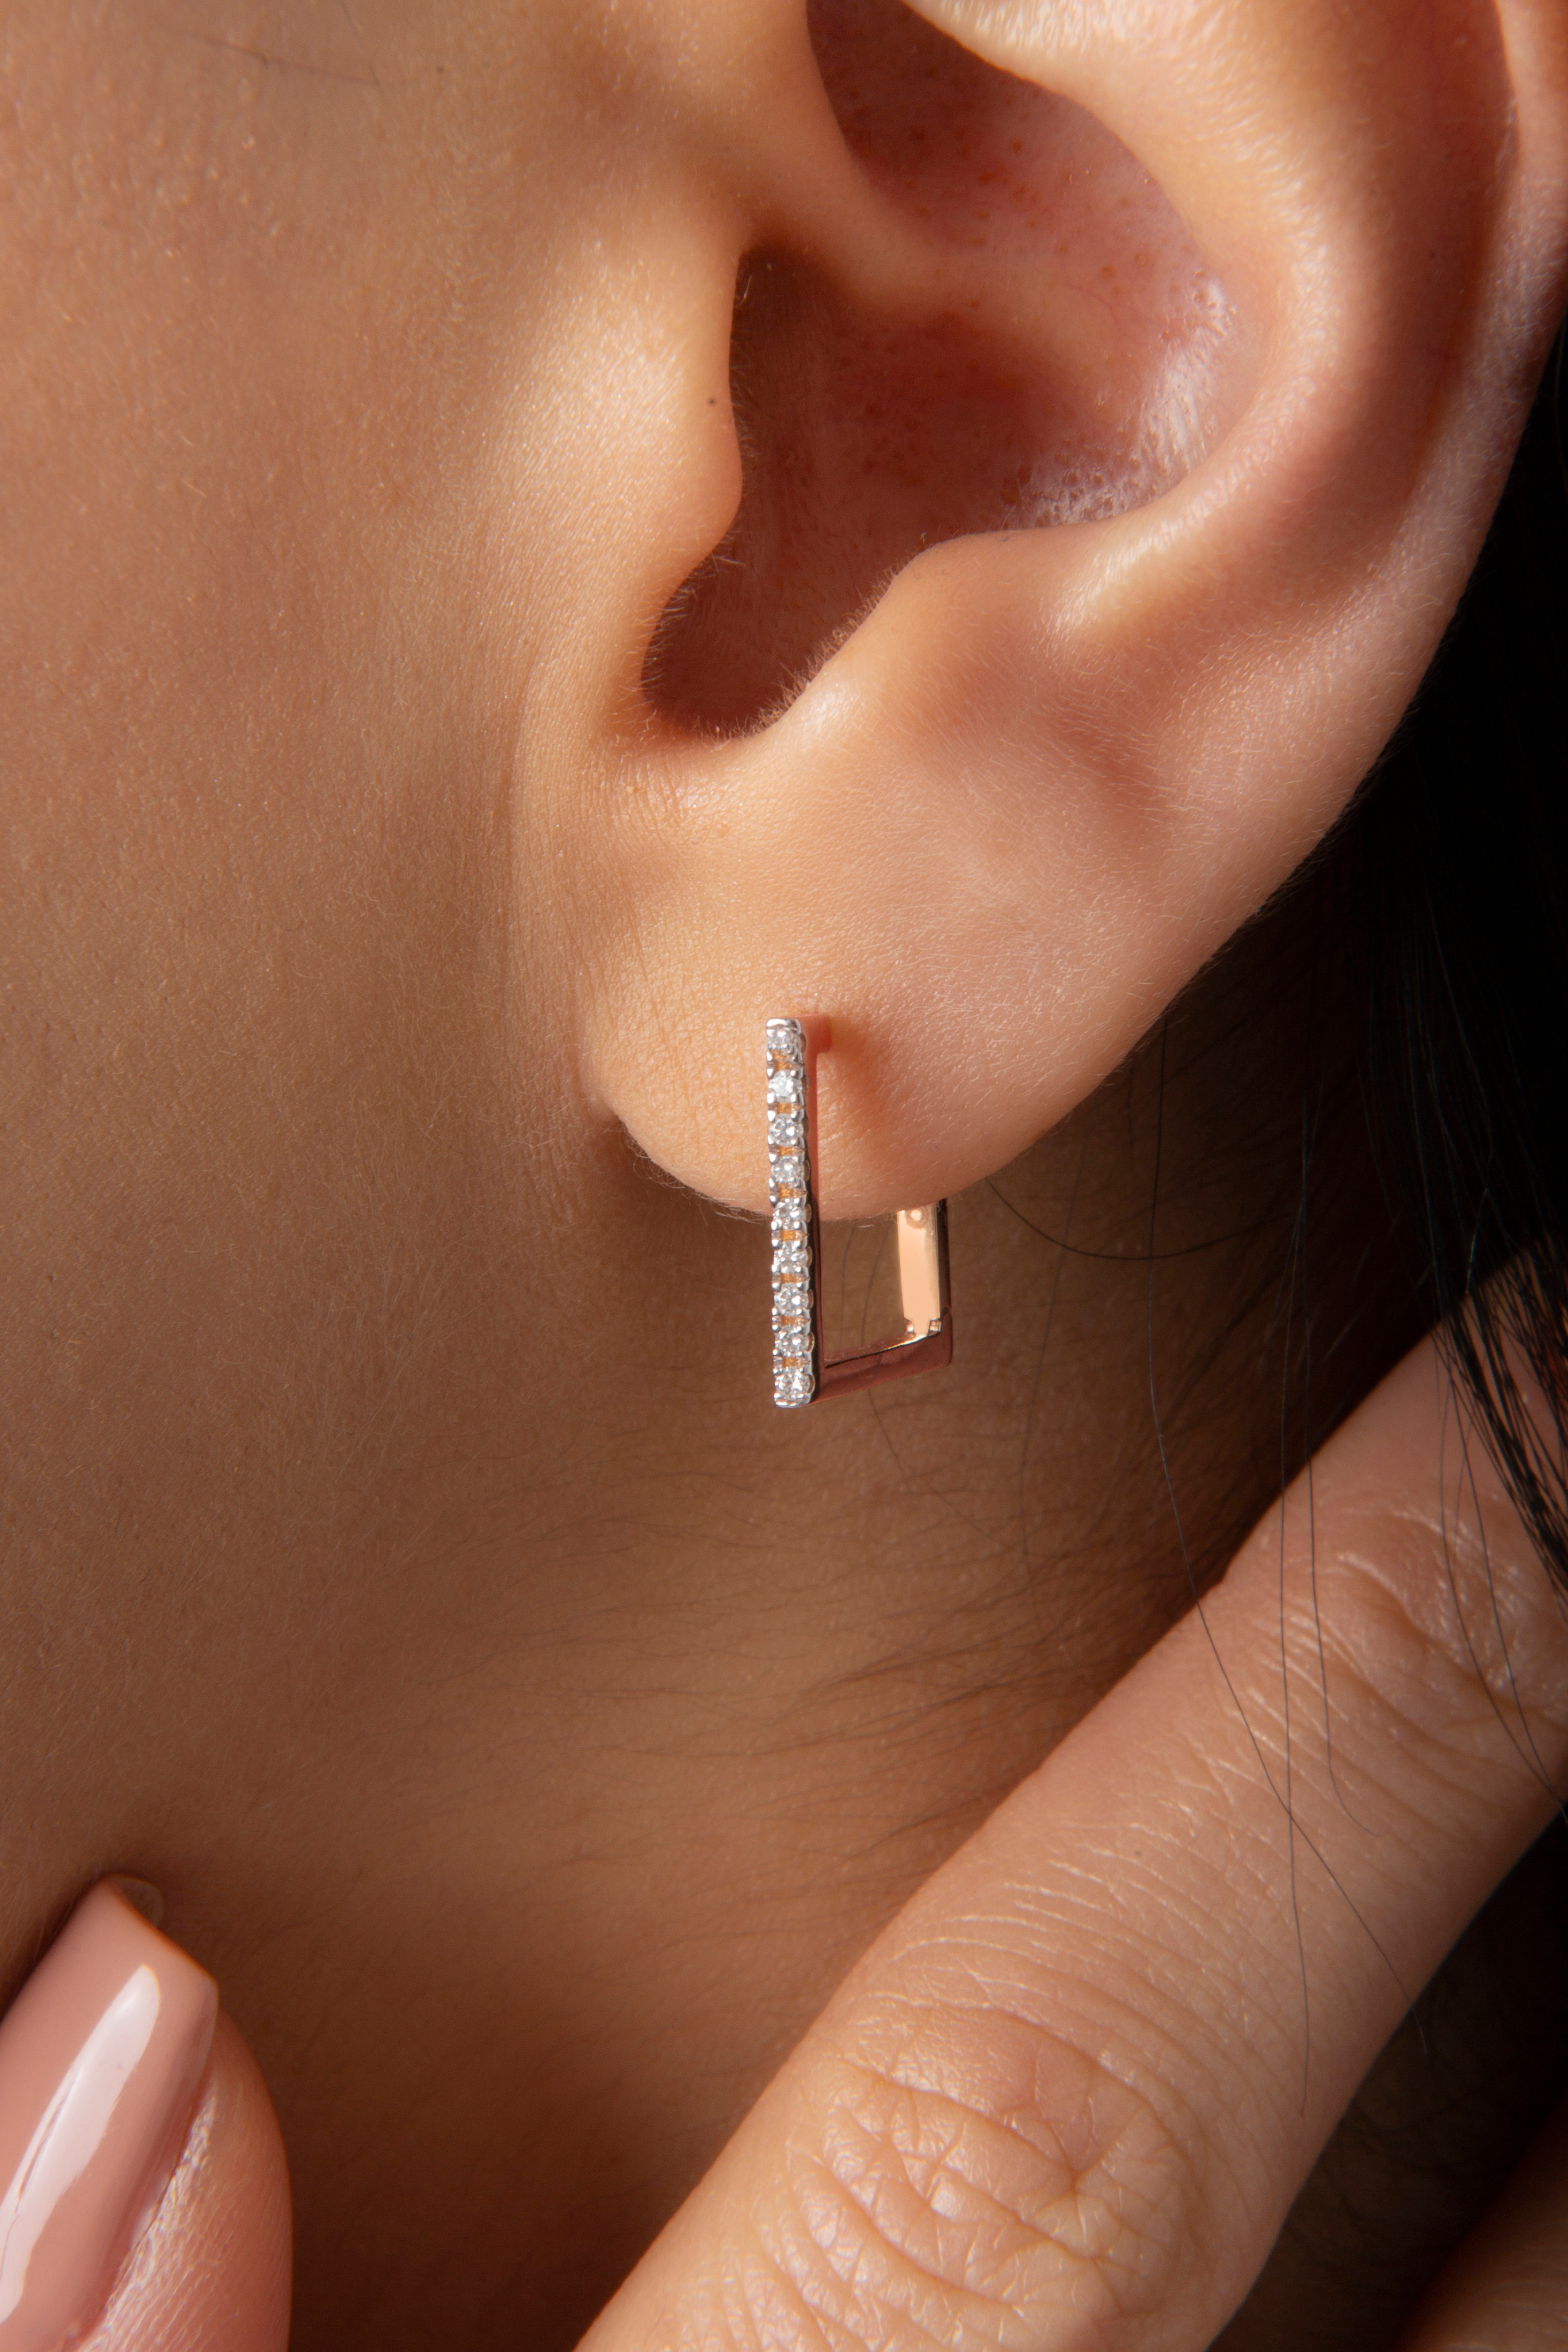 Mini Square Earring in Rose Gold - Her Story Shop